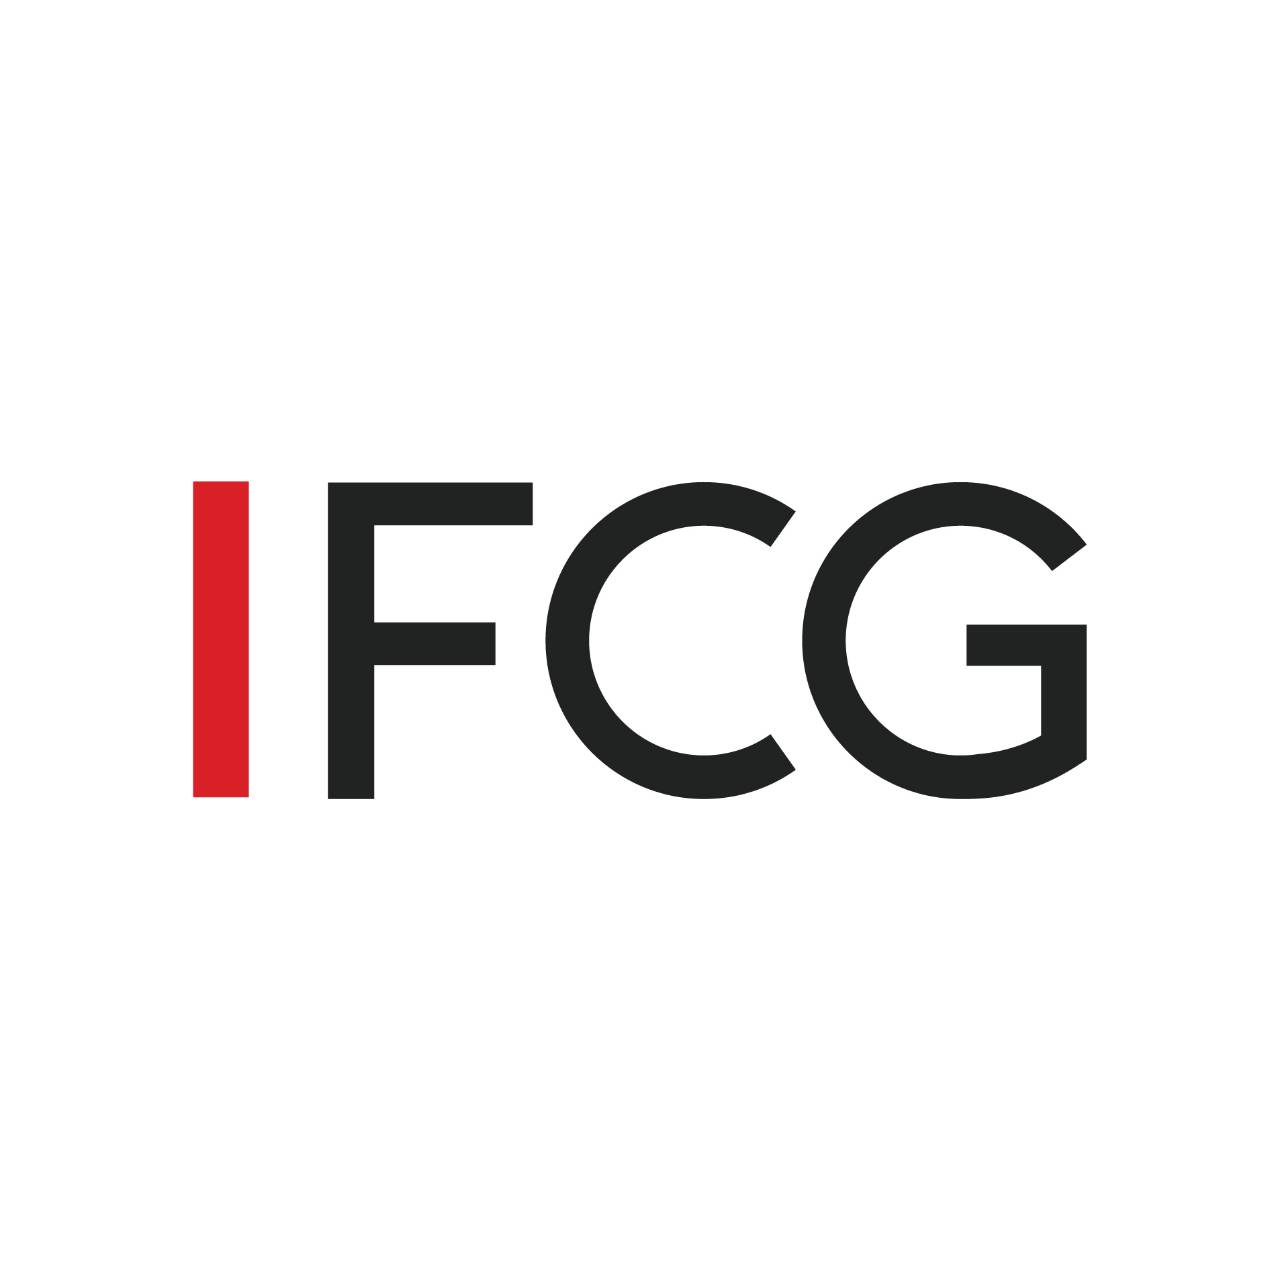 Independent Financial Consulting Group Ltd. (IFCG)